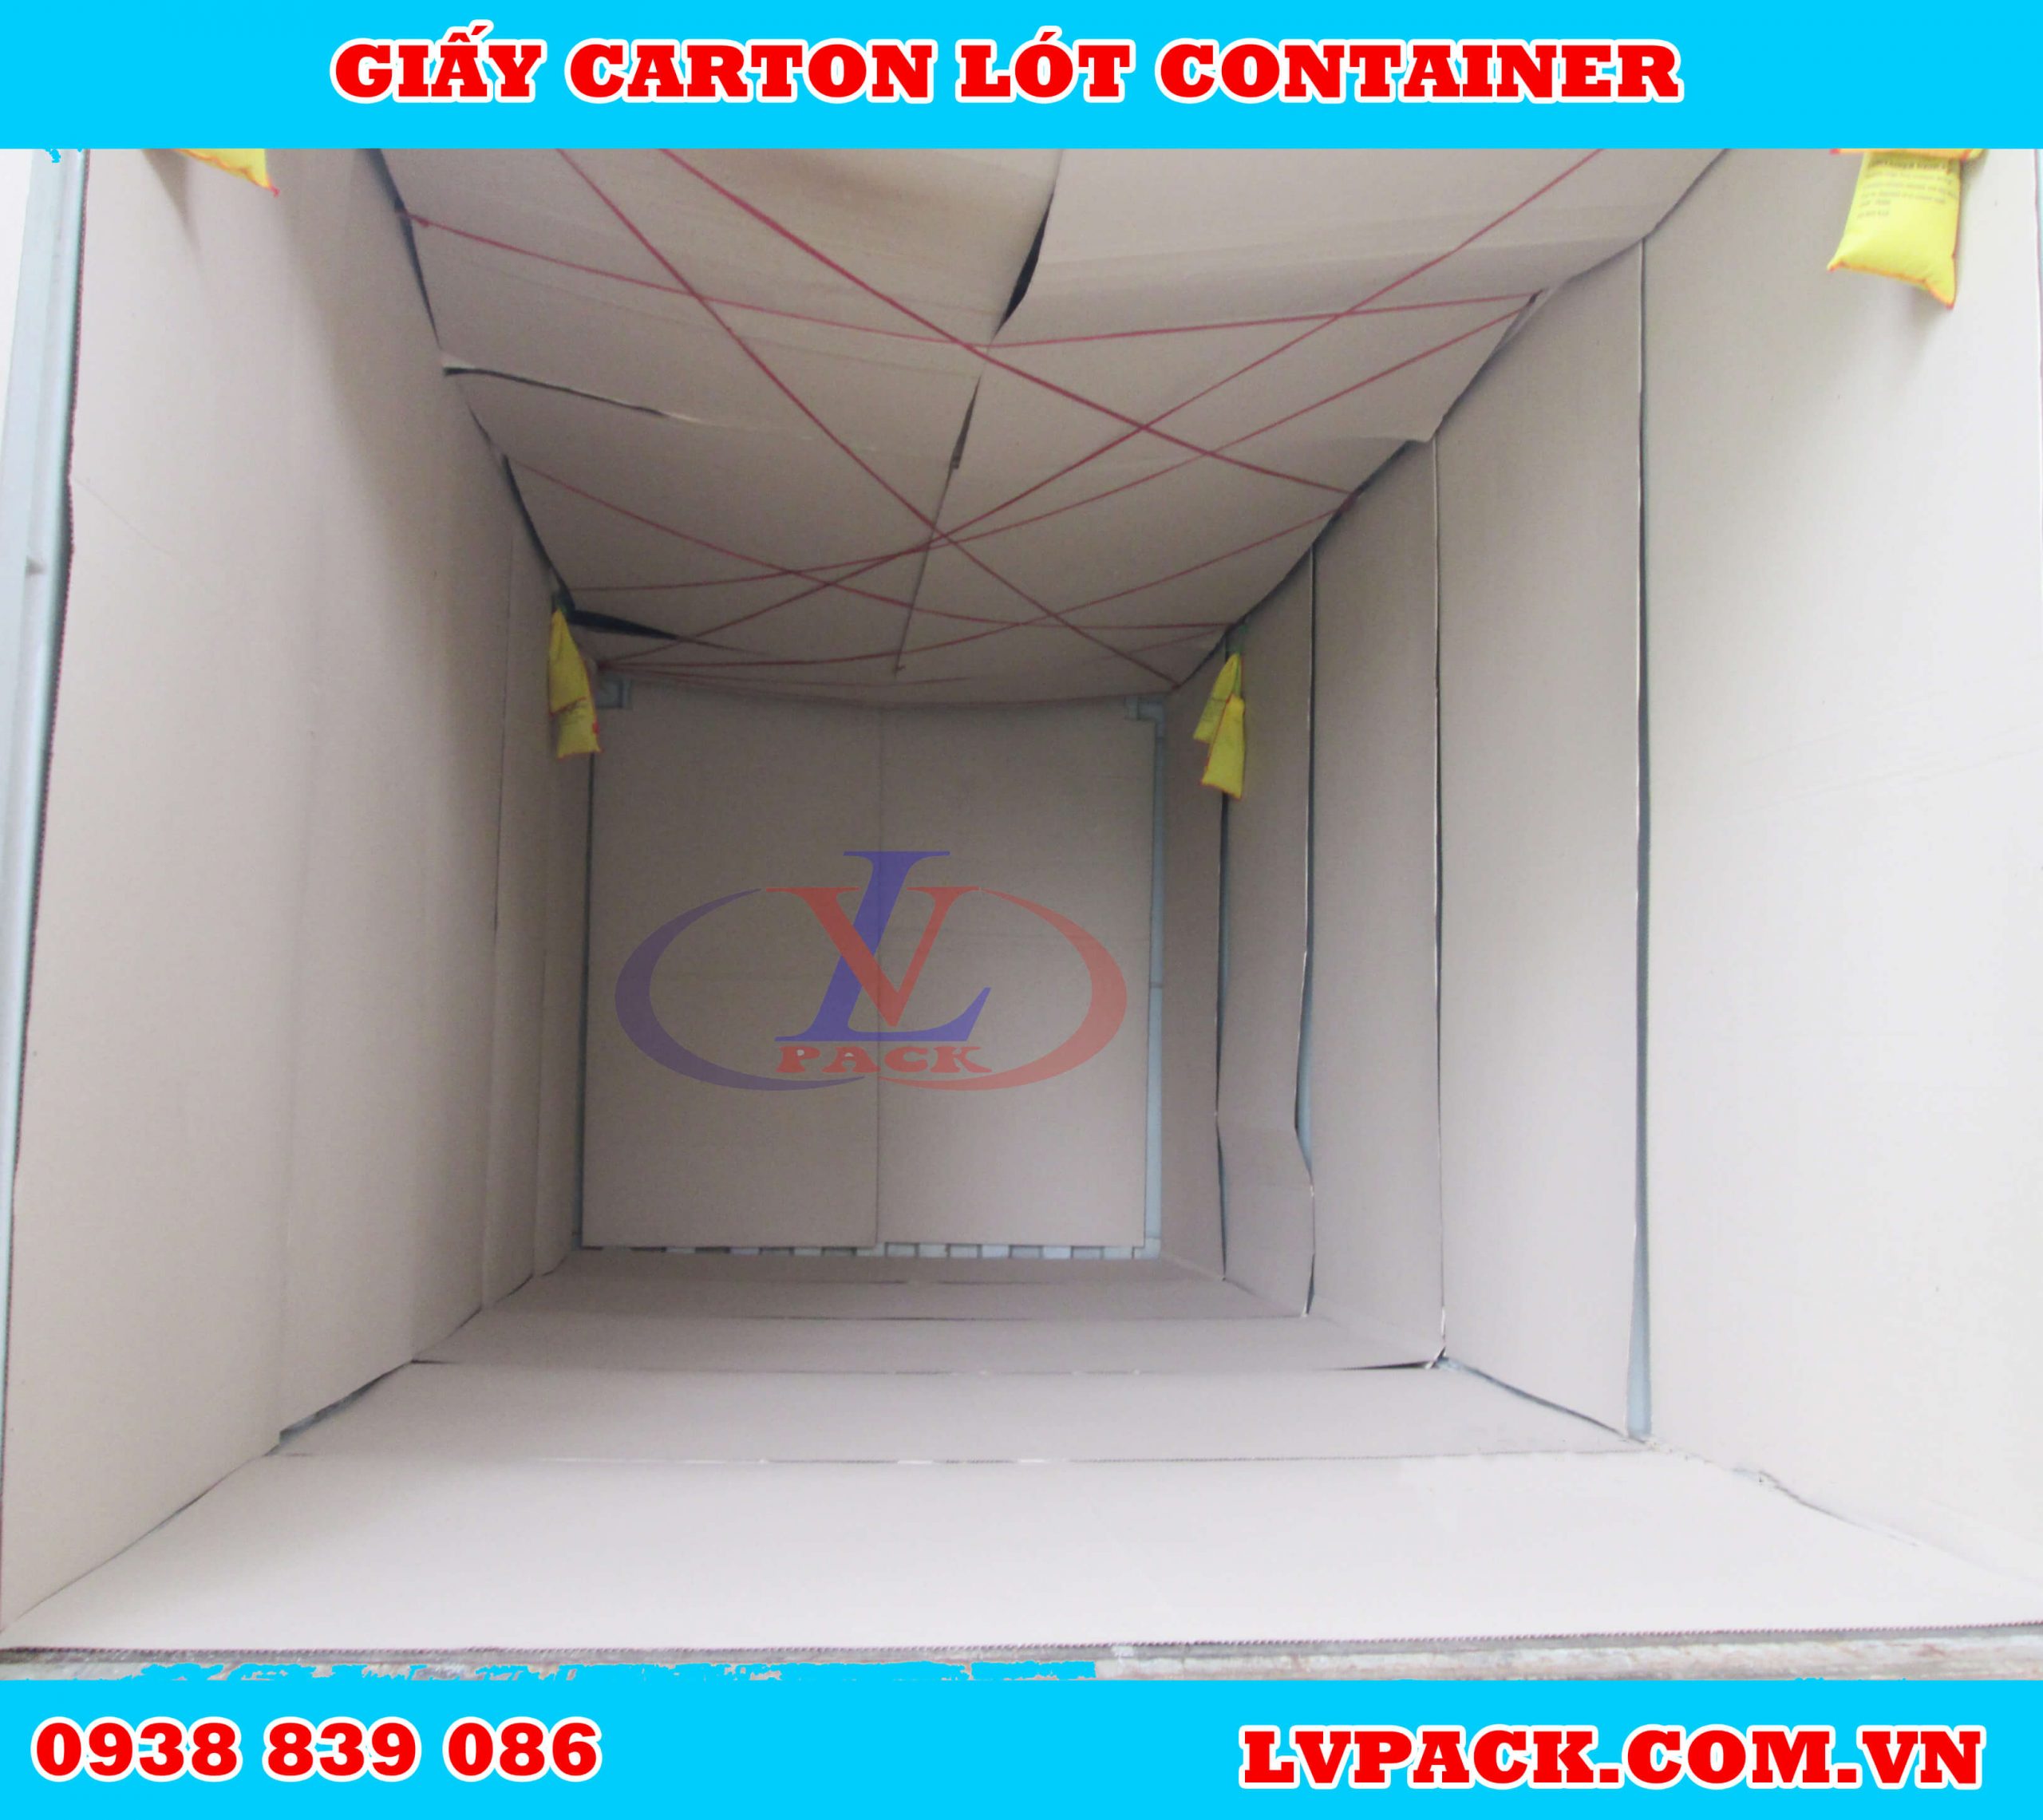 Giấy lót container / Giấy dán container